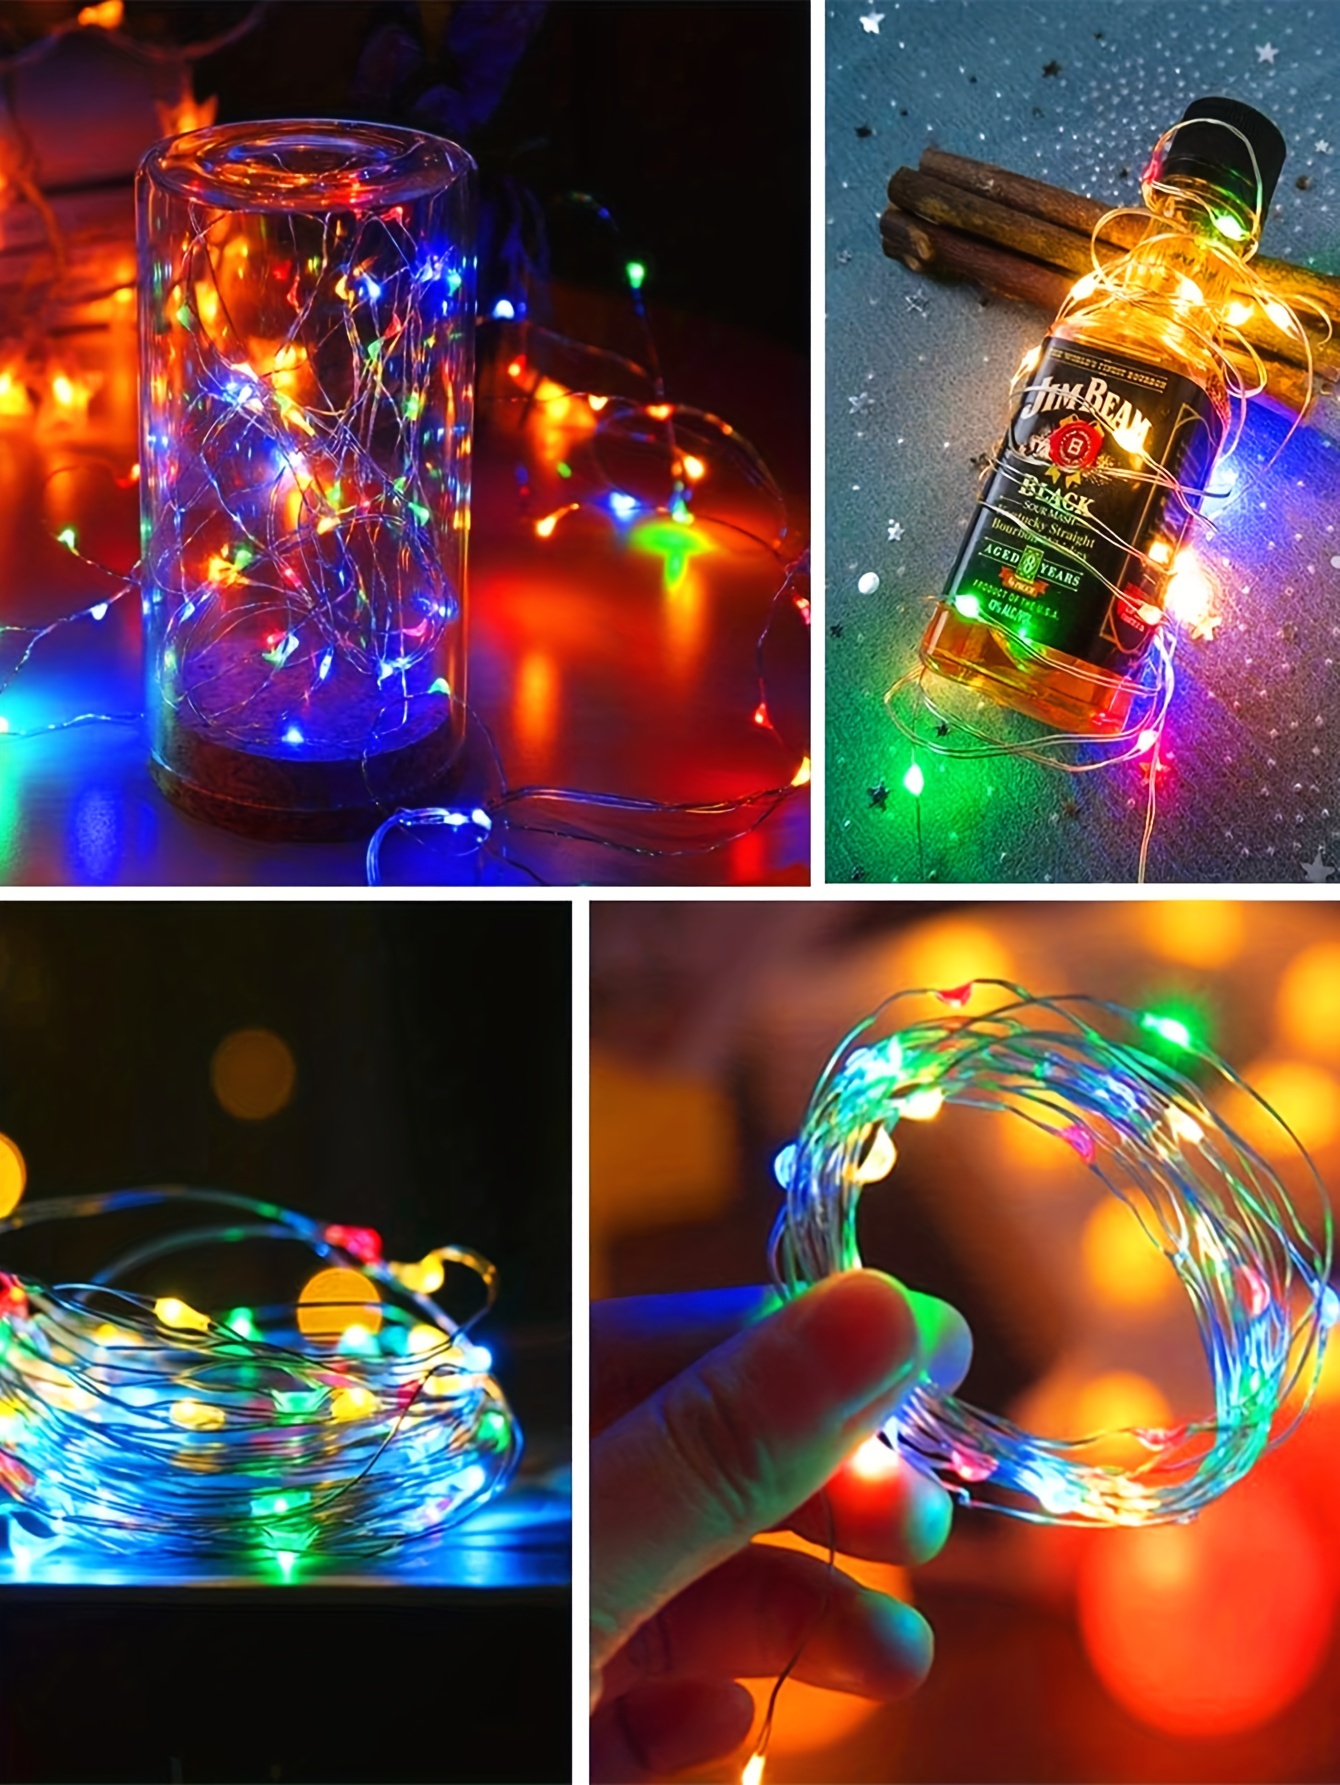 battery operated string lights, led fairy lights battery operated string lights copper wire string lights mini battery powered led lights for bedroom christmas parties wedding centerpiece decoration details 8